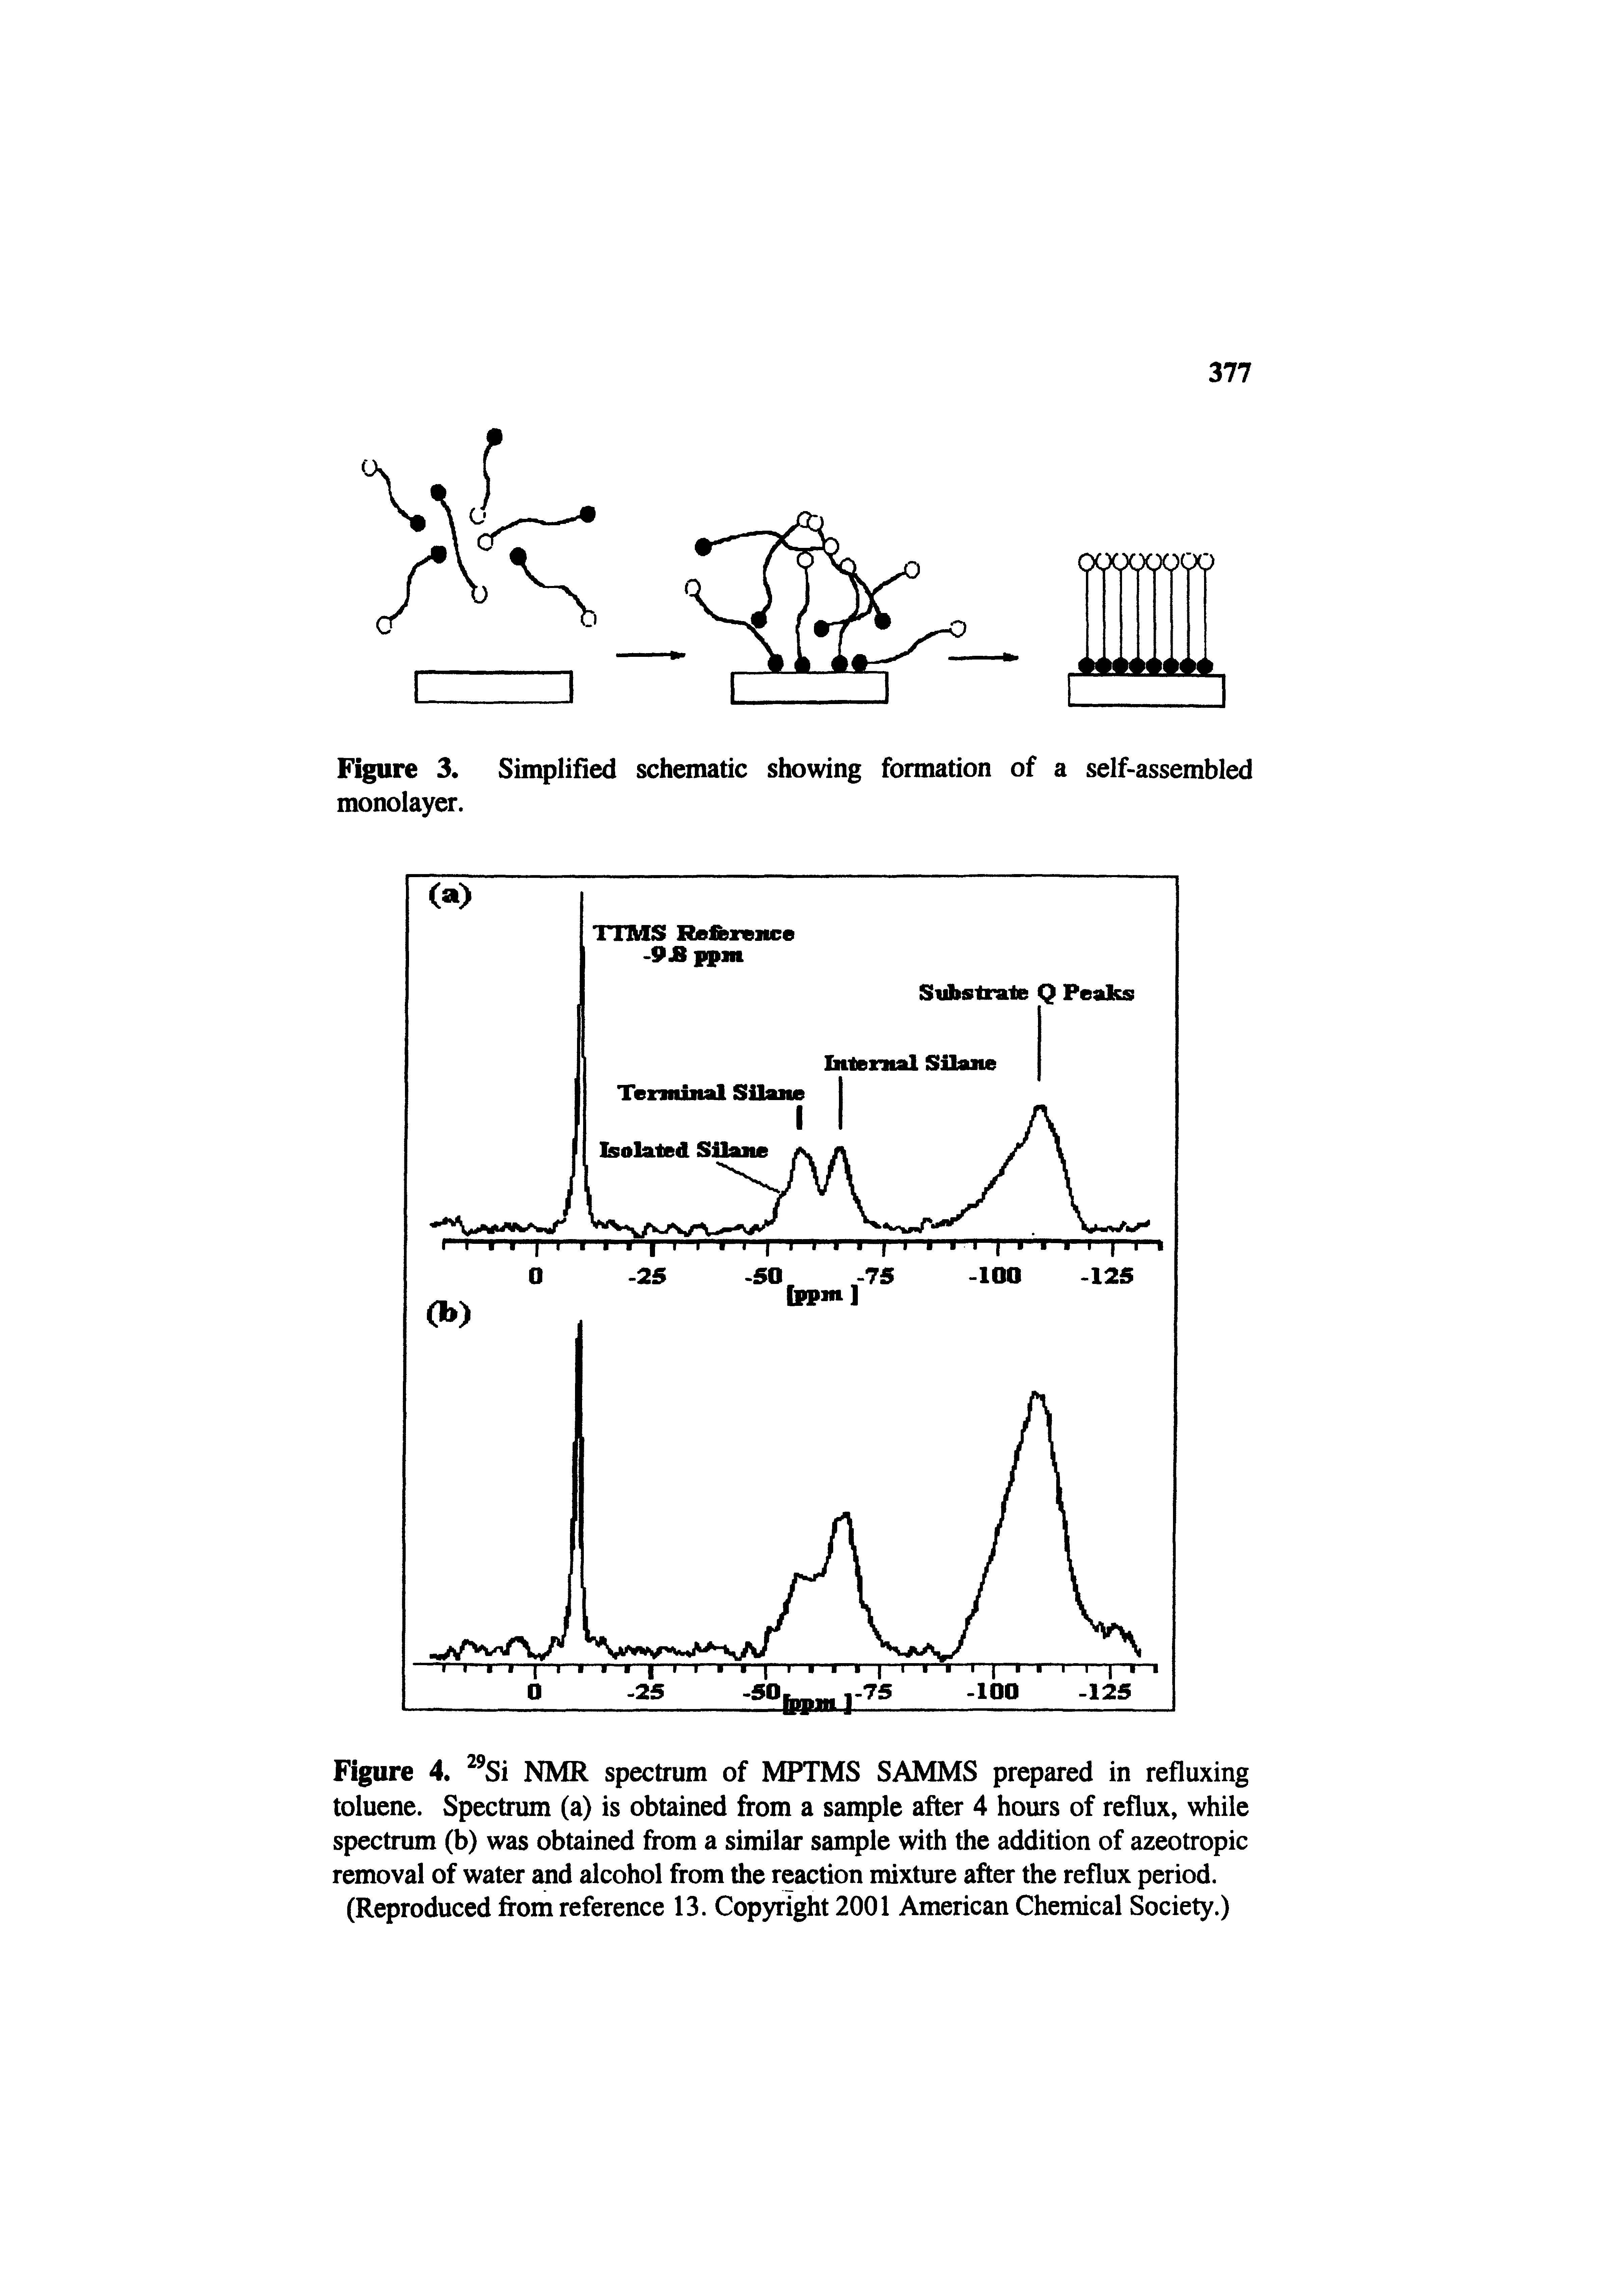 Figure 4. Si NMR spectrum of MPTMS SAMMS prepared in refluxing toluene. Spectrum (a) is obtained from a sample after 4 hours of reflux, while spectrum (b) was obtained from a similar sample with the addition of azeotropic removal of water and alcohol from the reaction mixture after the reflux period.